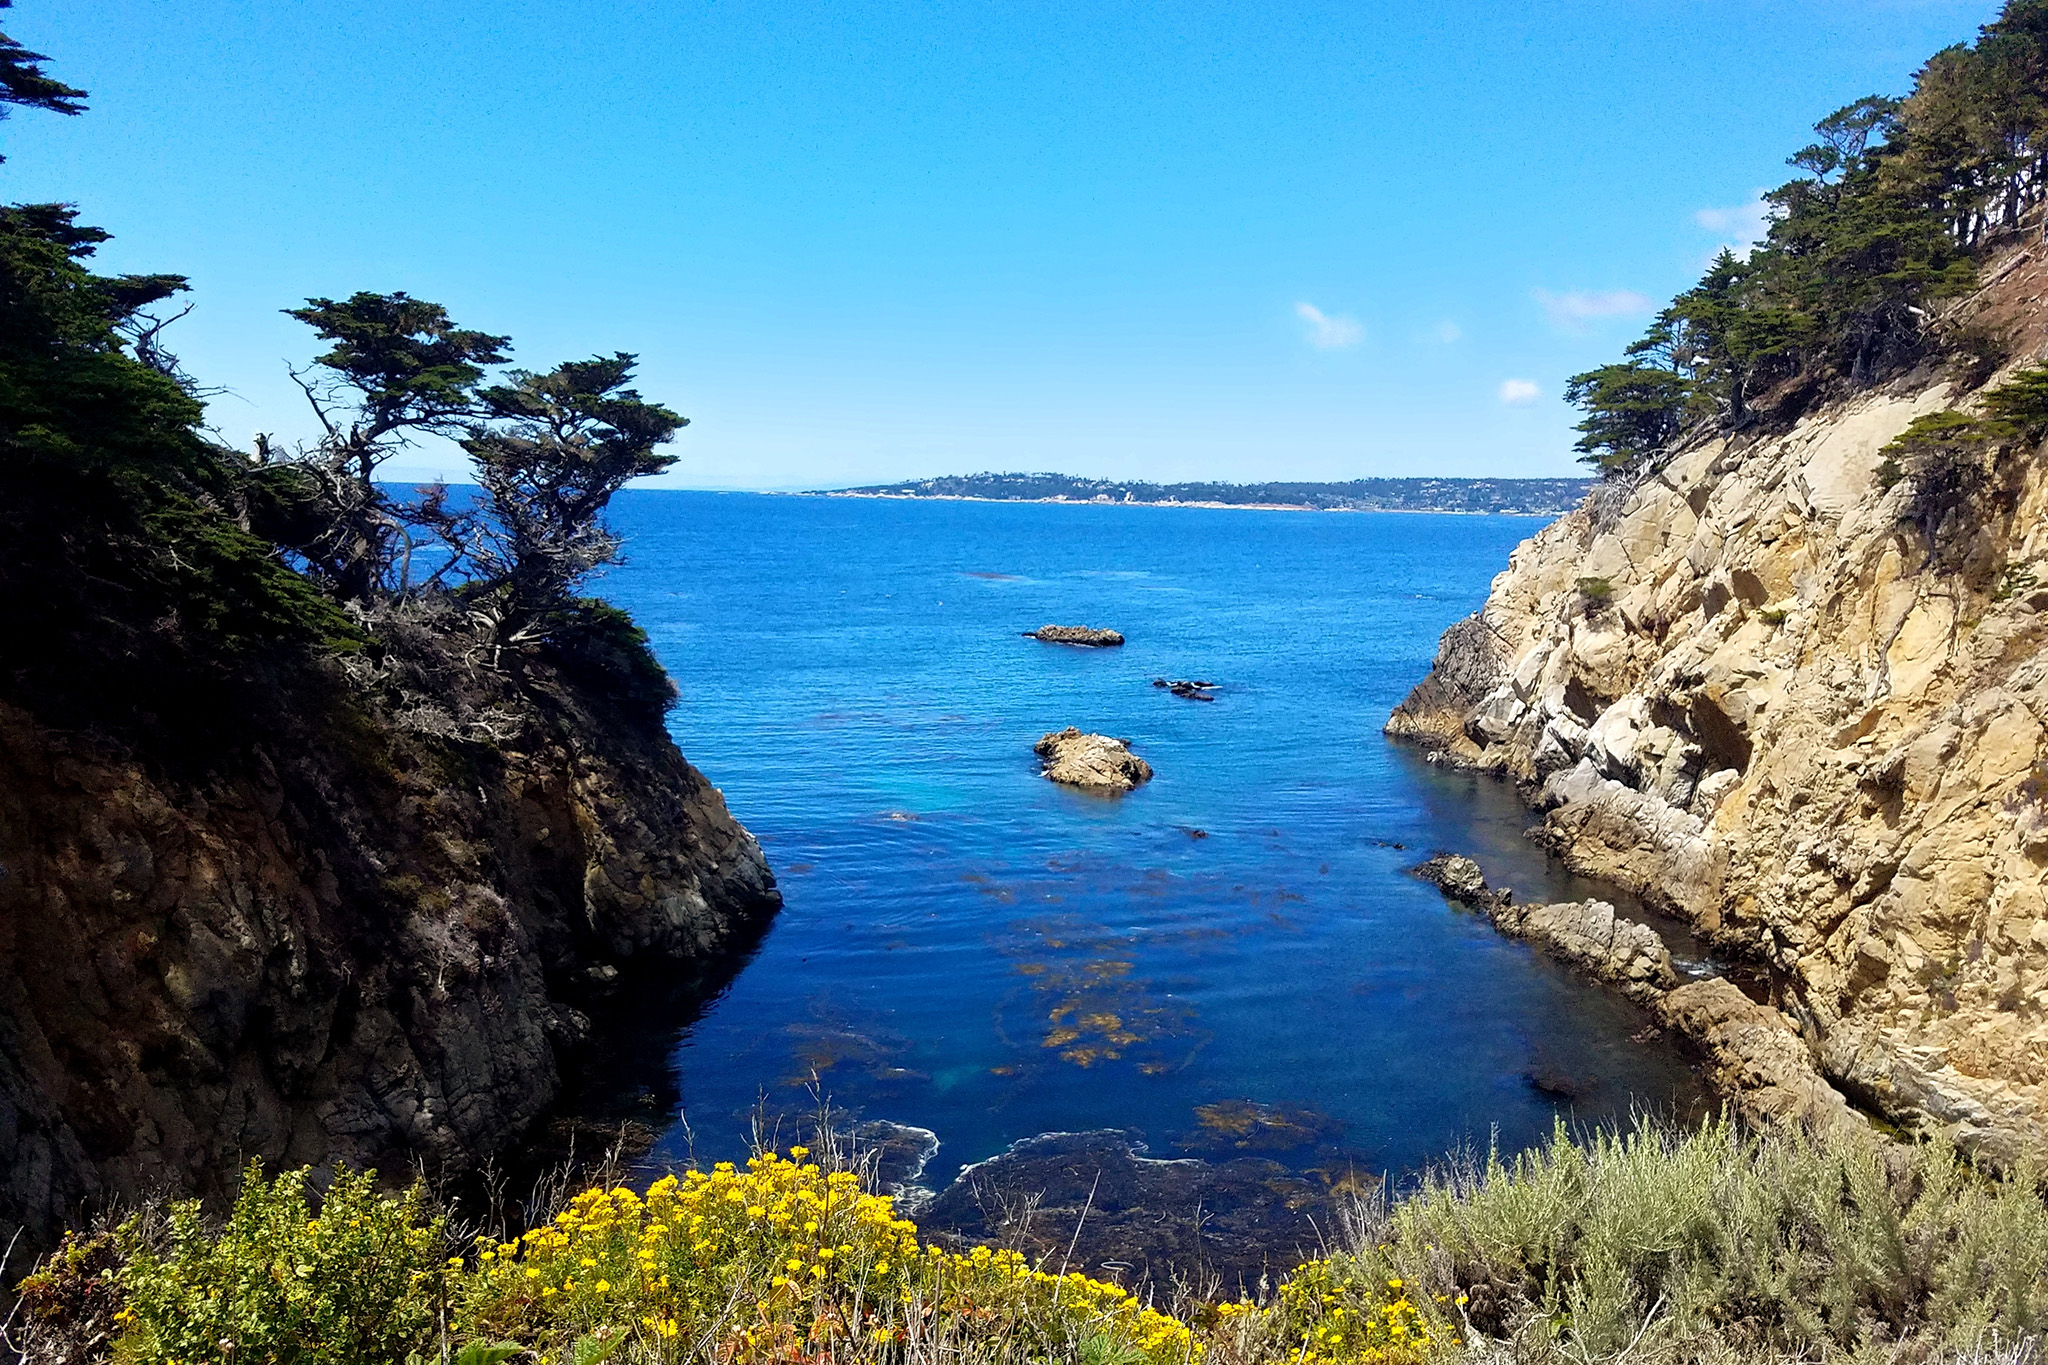 A visit to the 'crown jewel of California's State Parks'